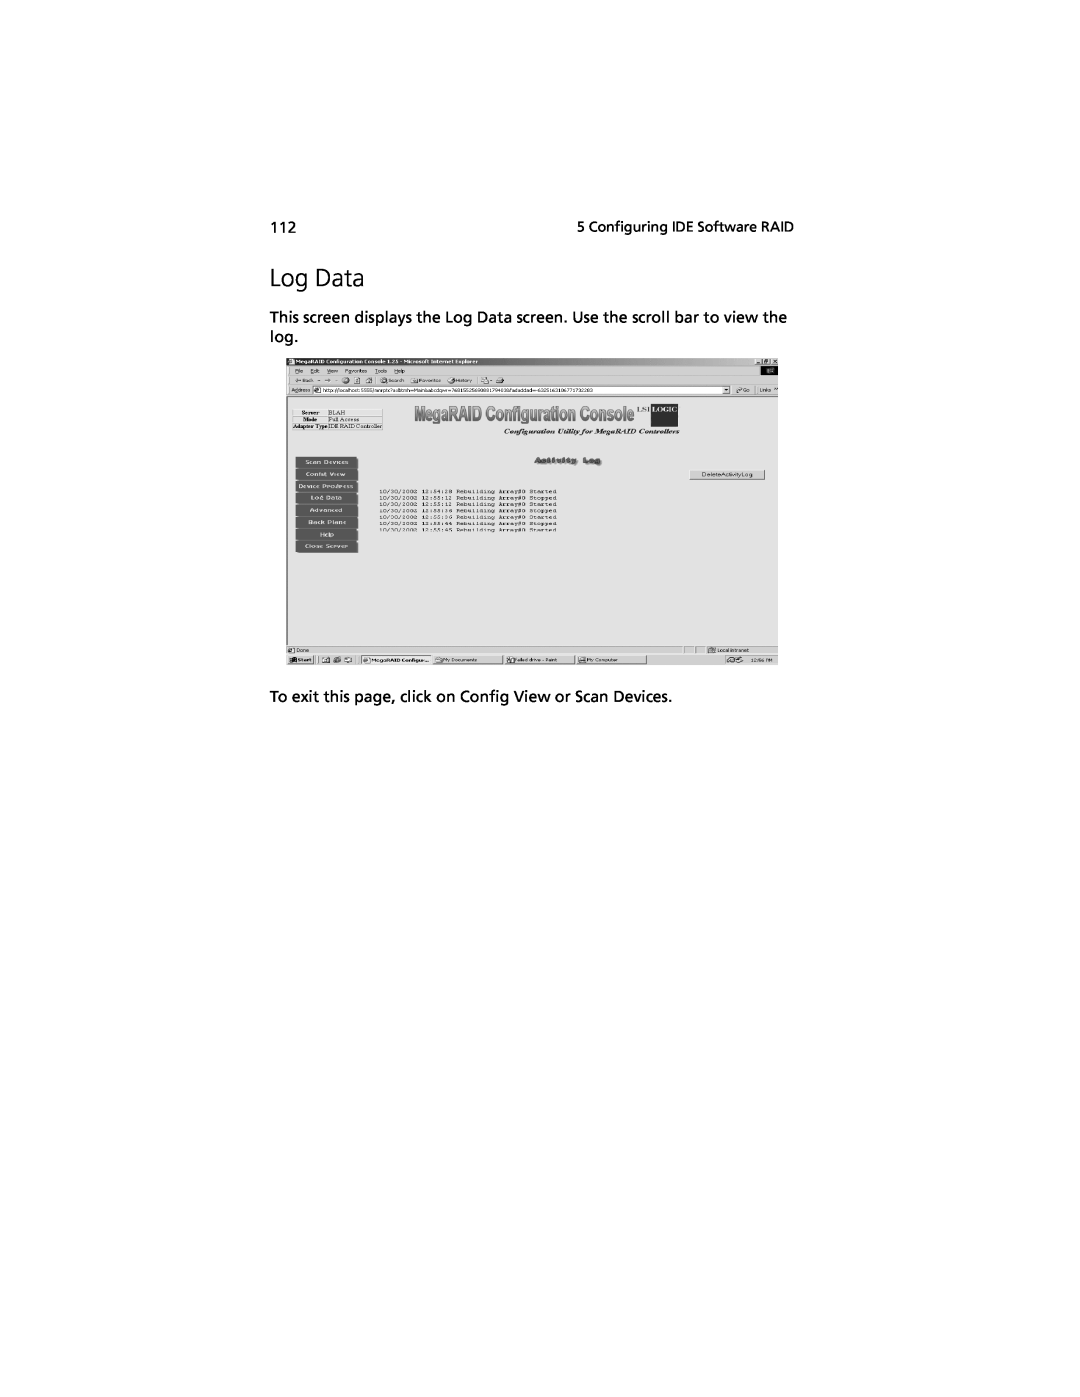 Acer G301 manual Log Data, To exit this page, click on Config View or Scan Devices 